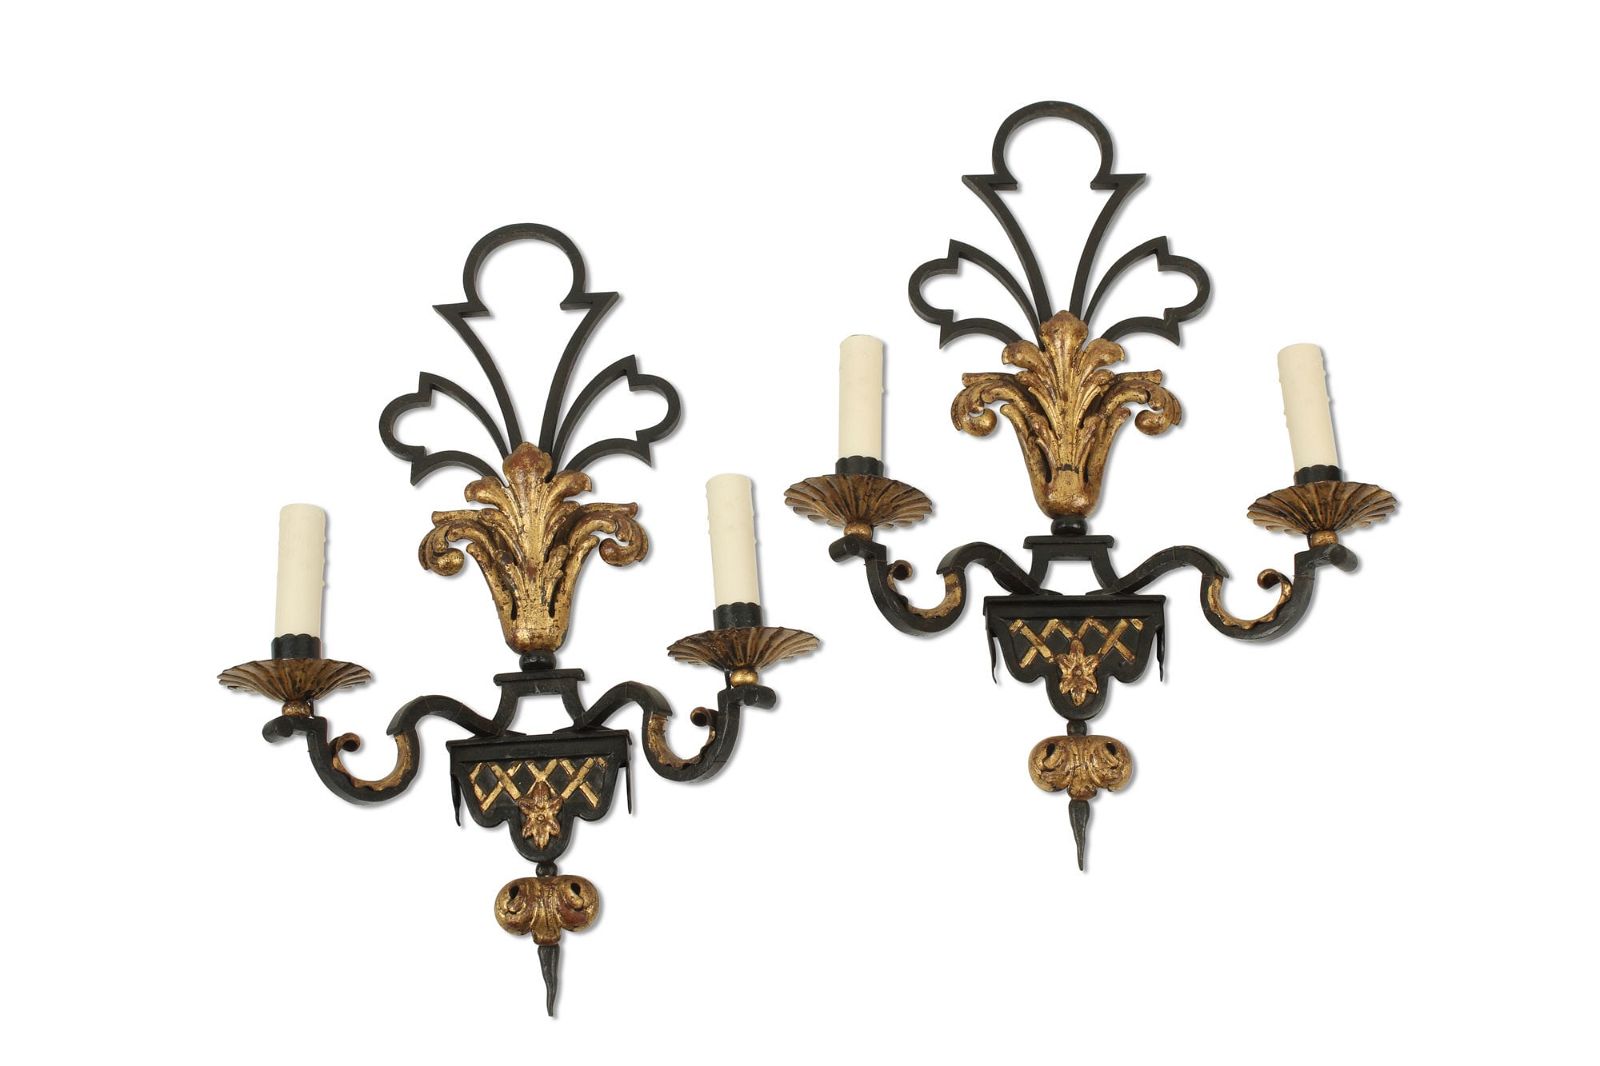 A PAIR OF WROUGHT IRON WALL SCONCES  2fb355d